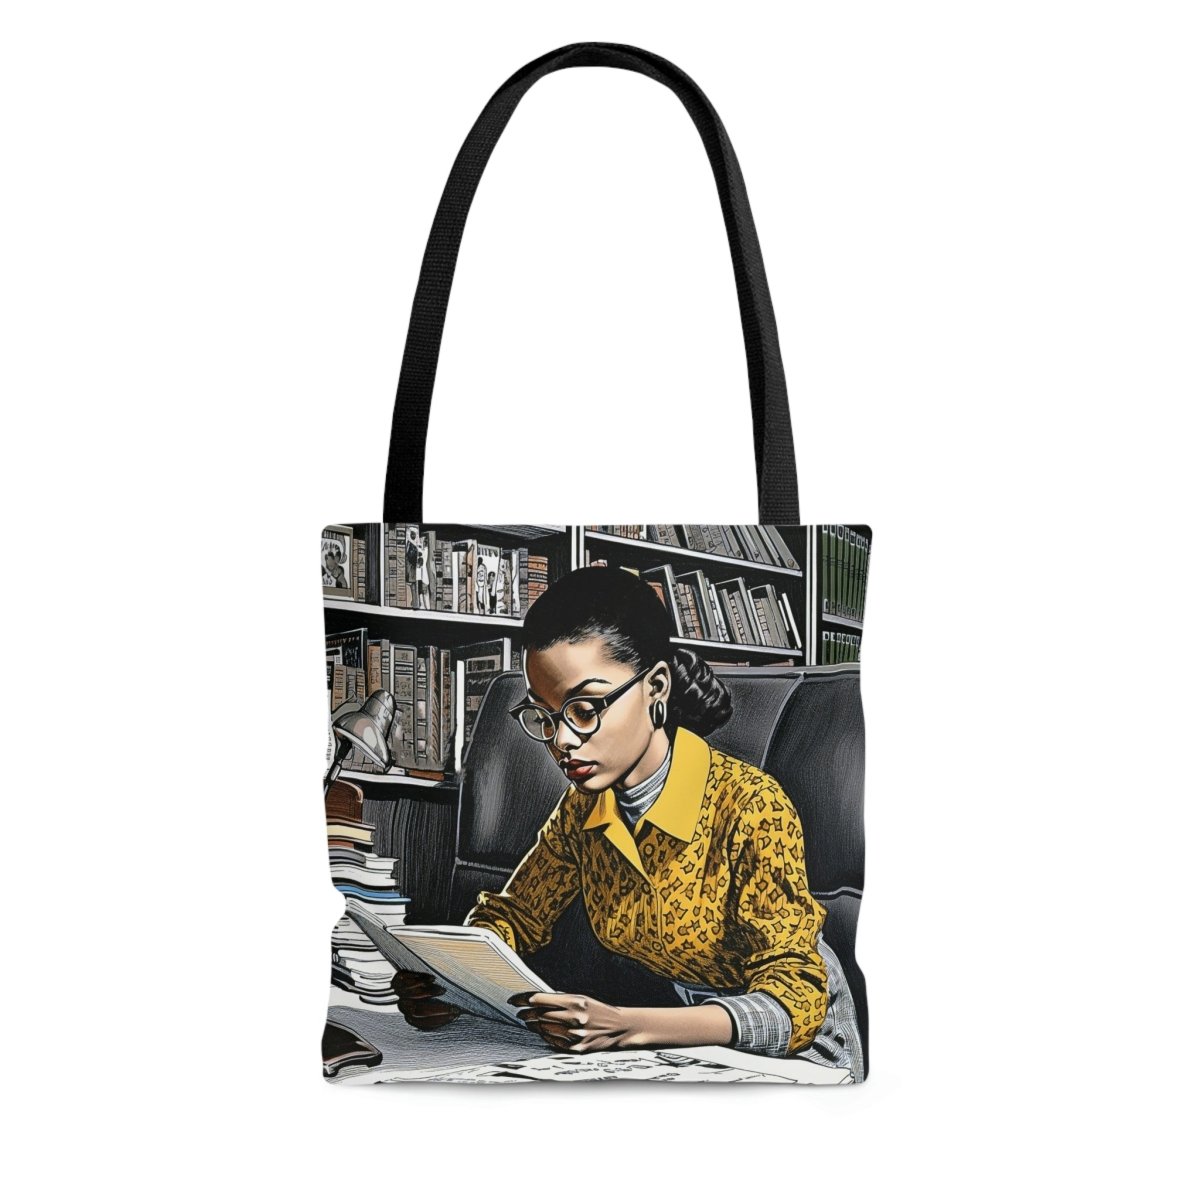 Scholarly Woman Tote Bag - The Trini Gee